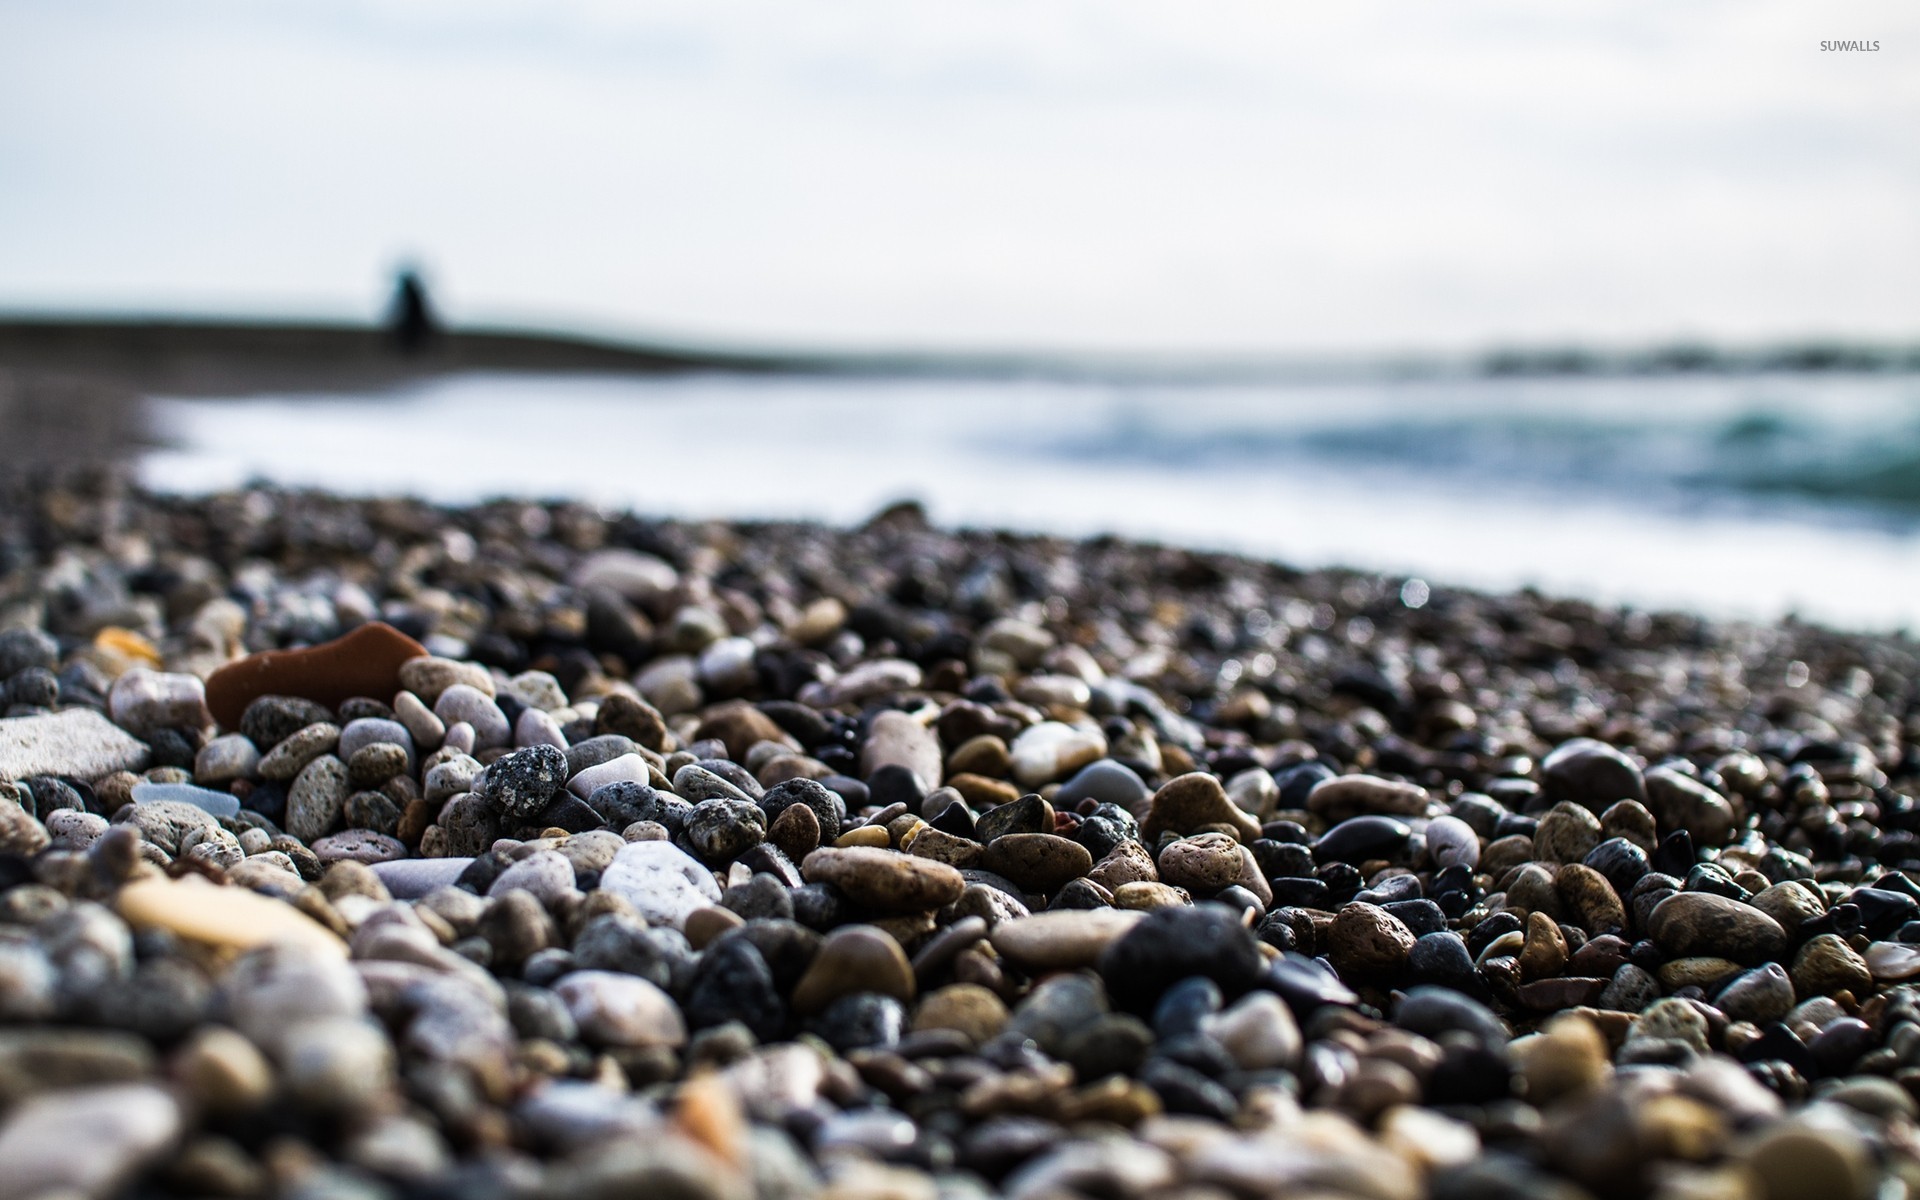 Pebbles on the beach wallpaper - Photography wallpapers - #21948